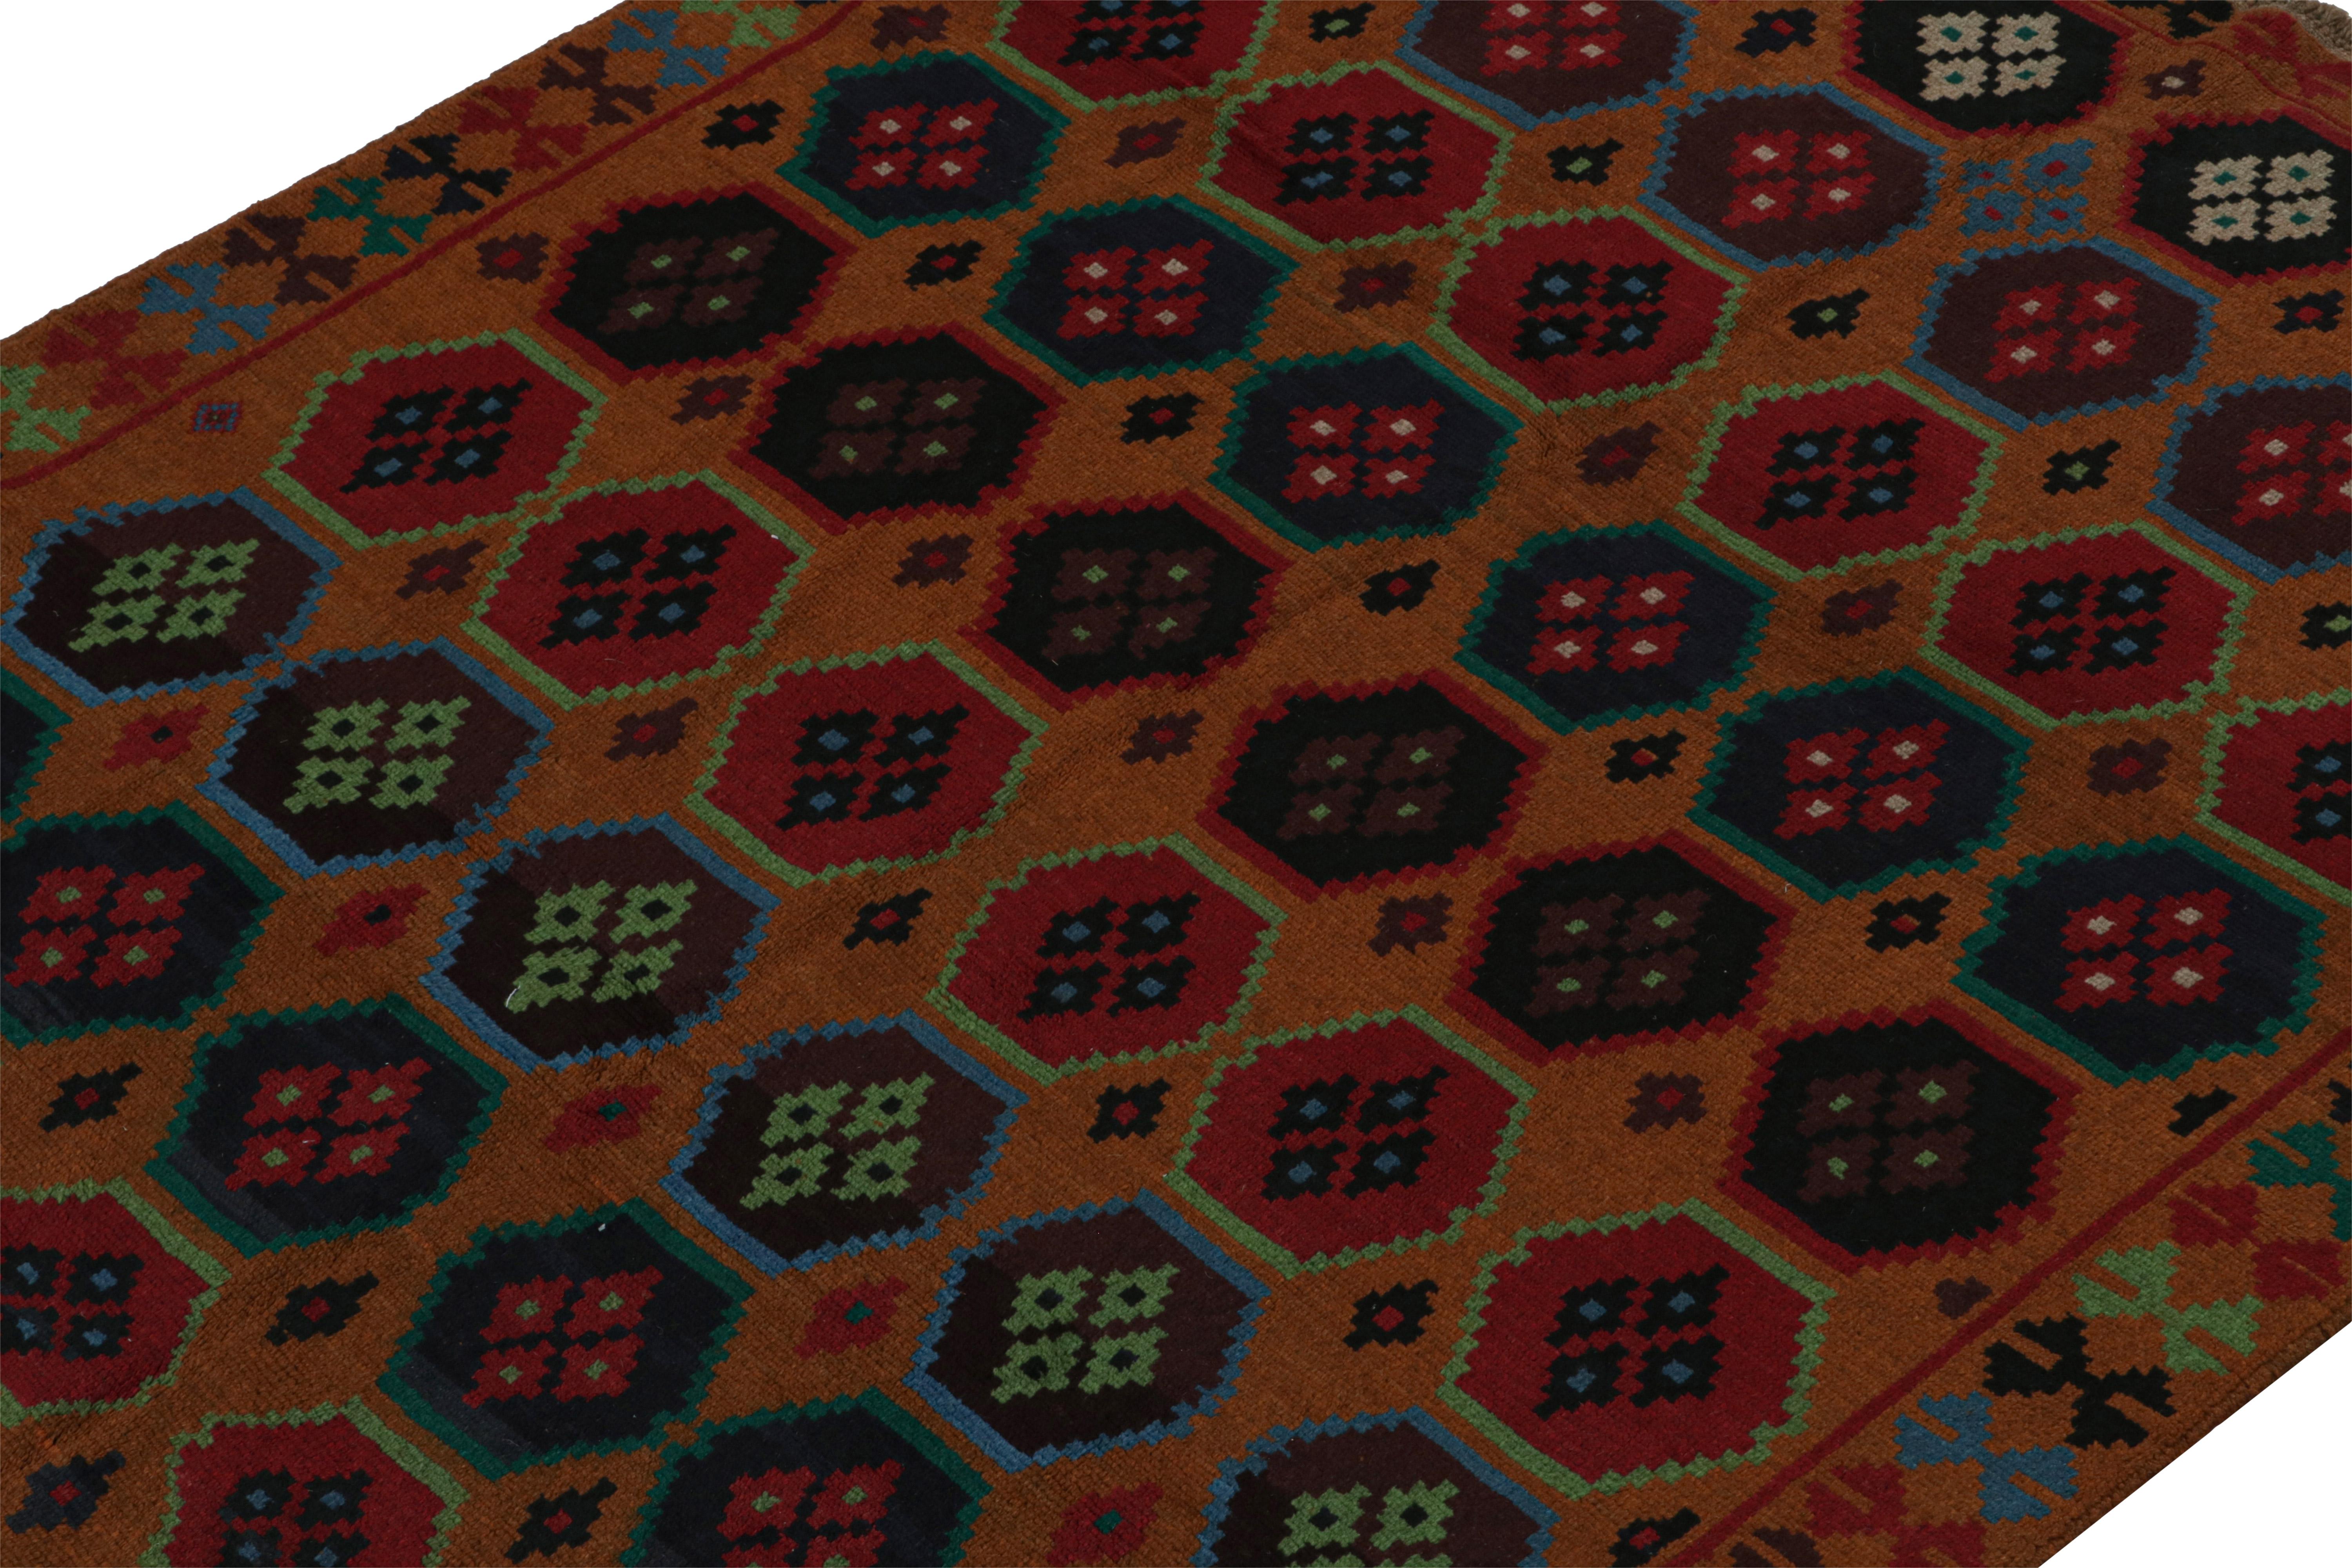 Hand-Knotted Rug & Kilim’s Baluch Tribal Rug in Rust Tones with Colorful Hexagon Patterns For Sale